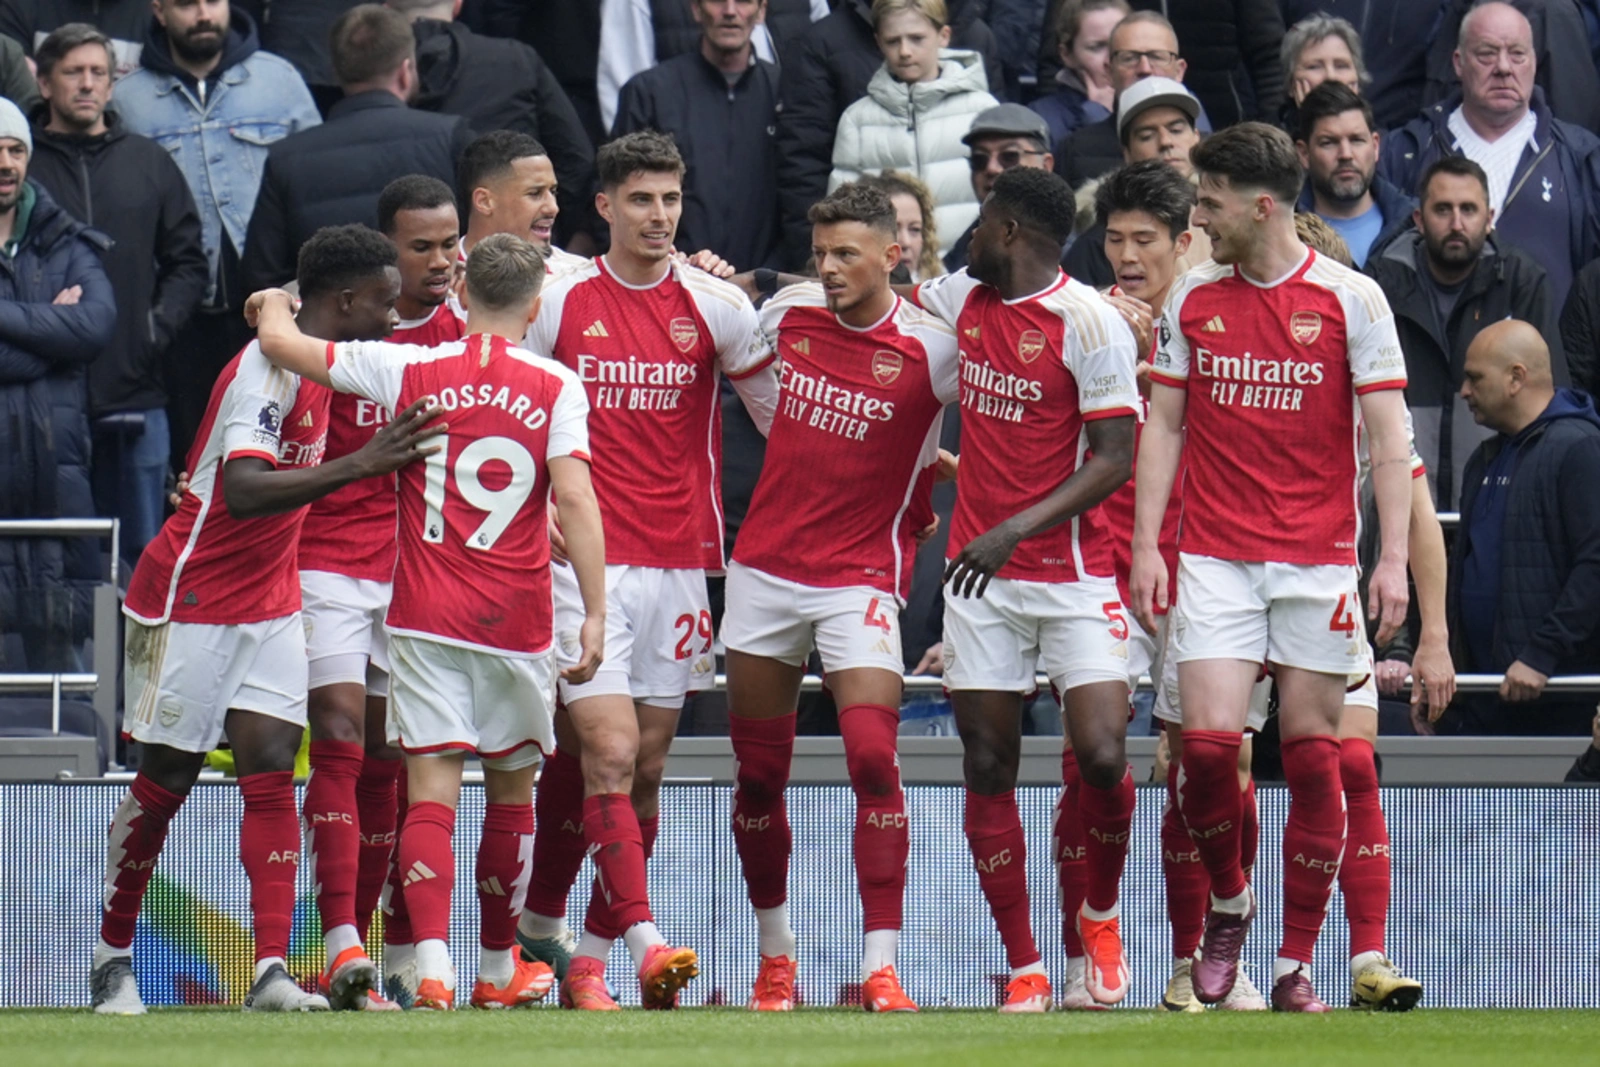 Arsenal secure thrilling 3-2 win over local rivals Spurs